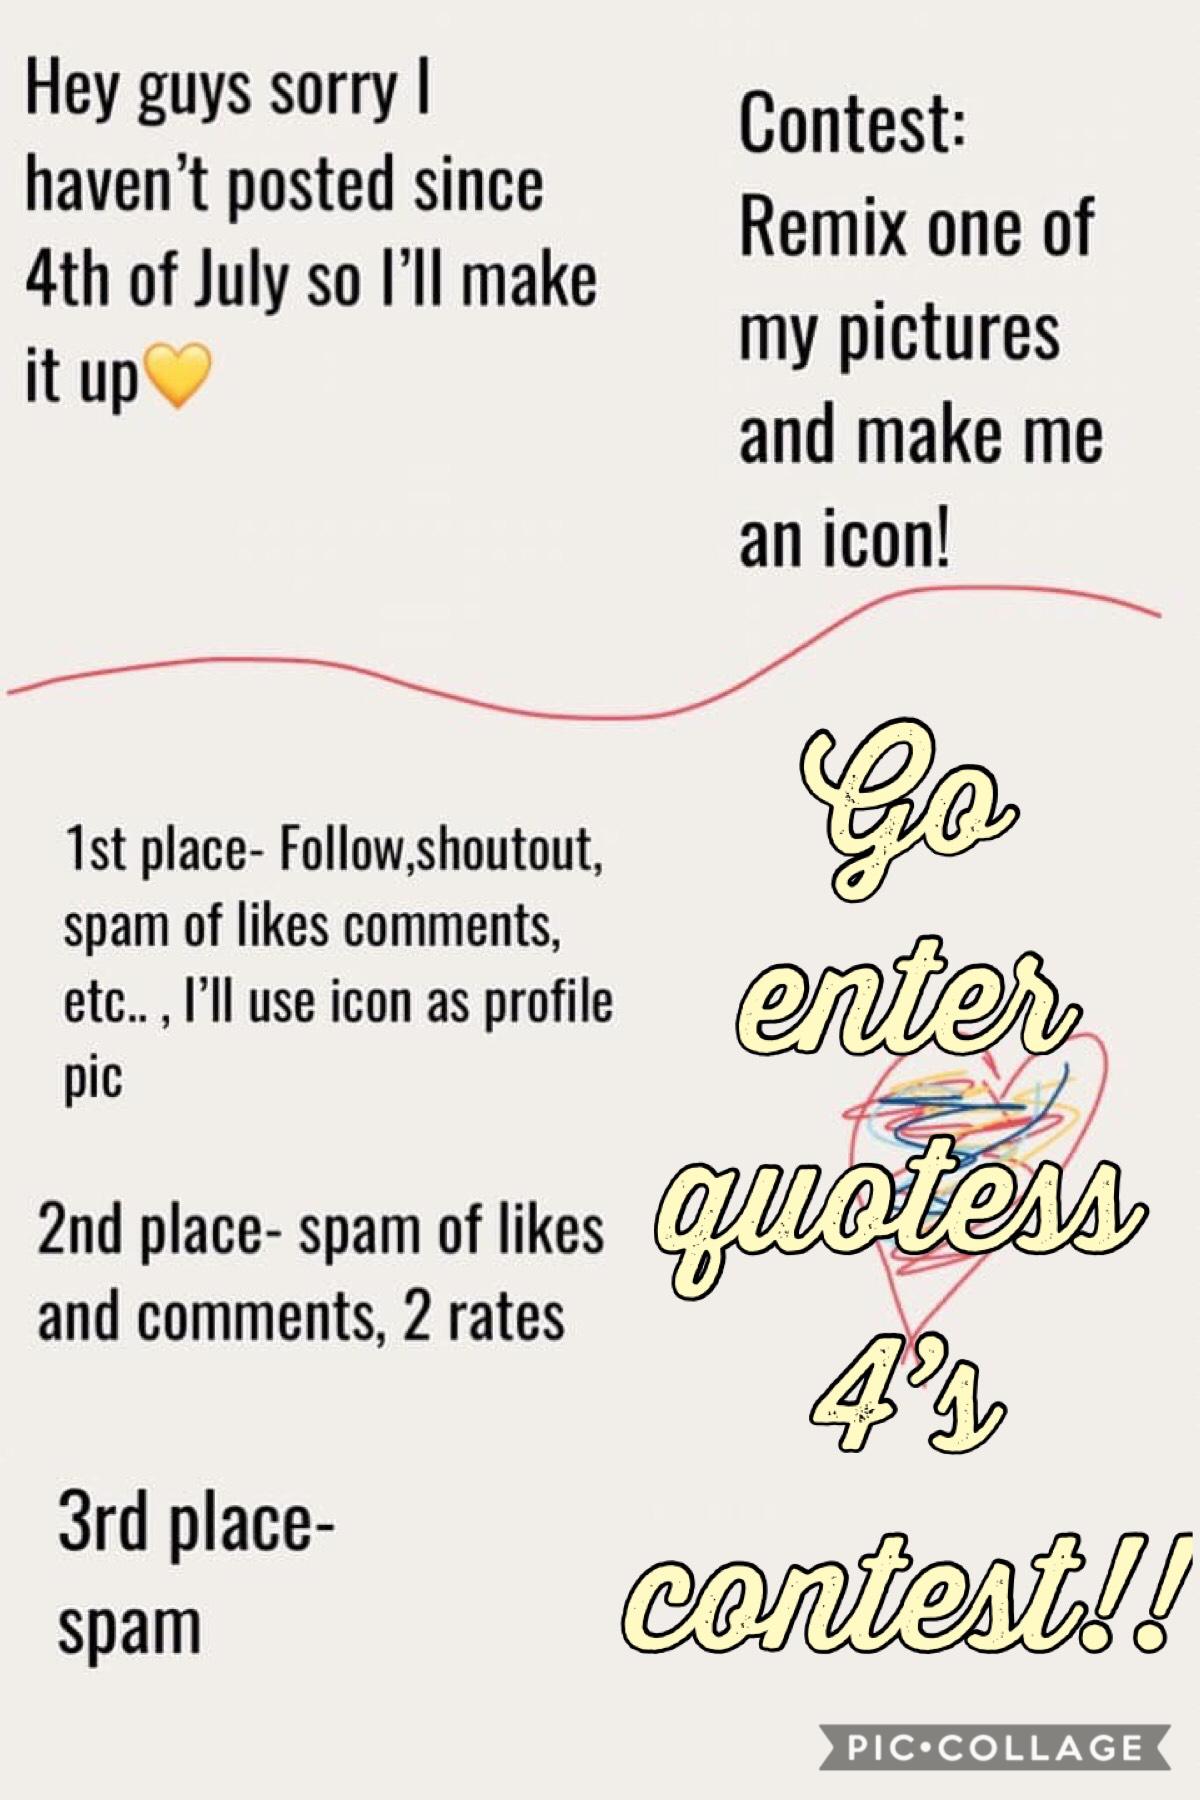 Enter her contest!!!!❤️🧡💛💚💙💜